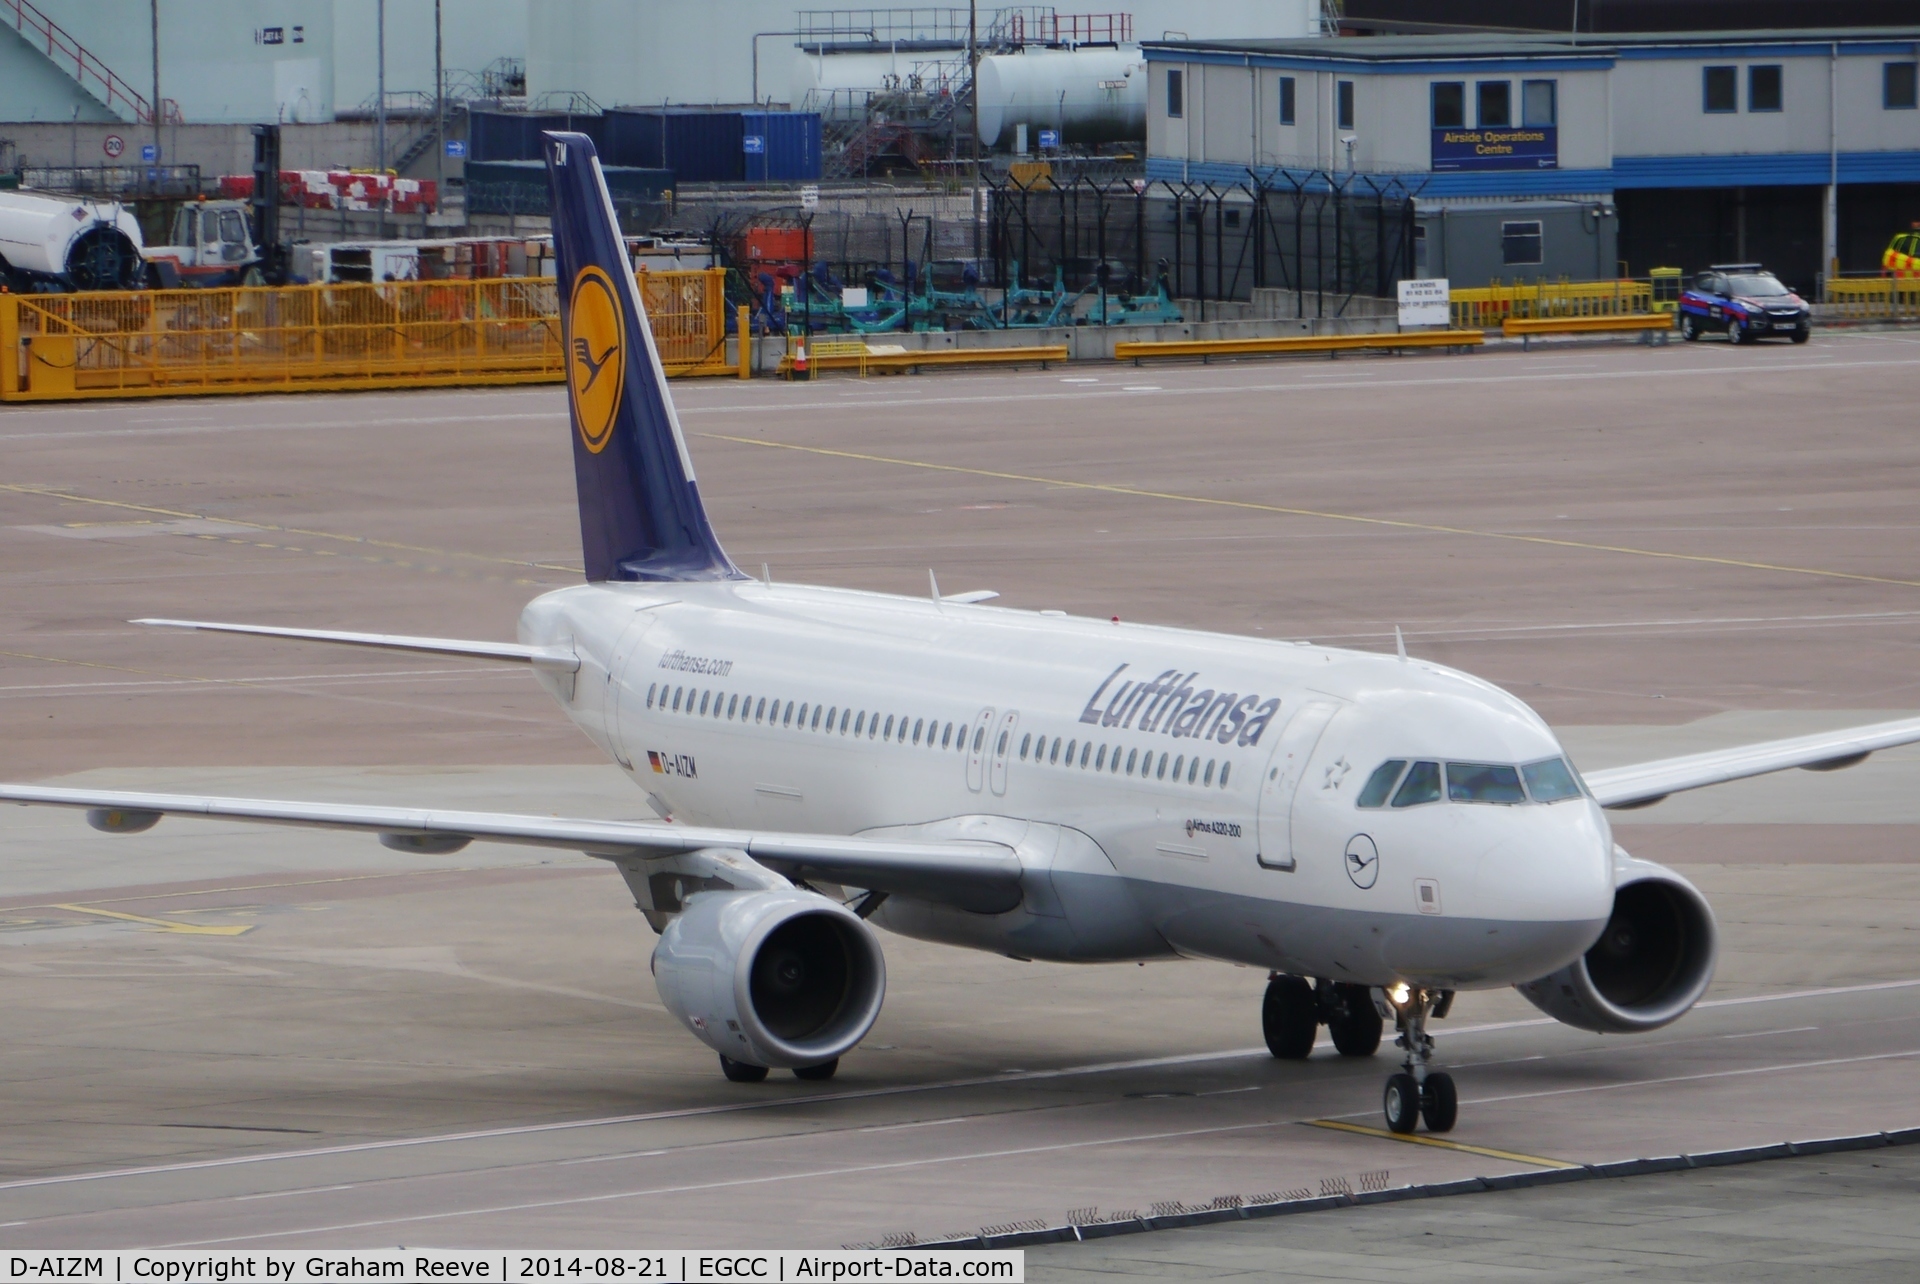 D-AIZM, 2012 Airbus A320-214 C/N 5203, About to go on stand at Manchester.